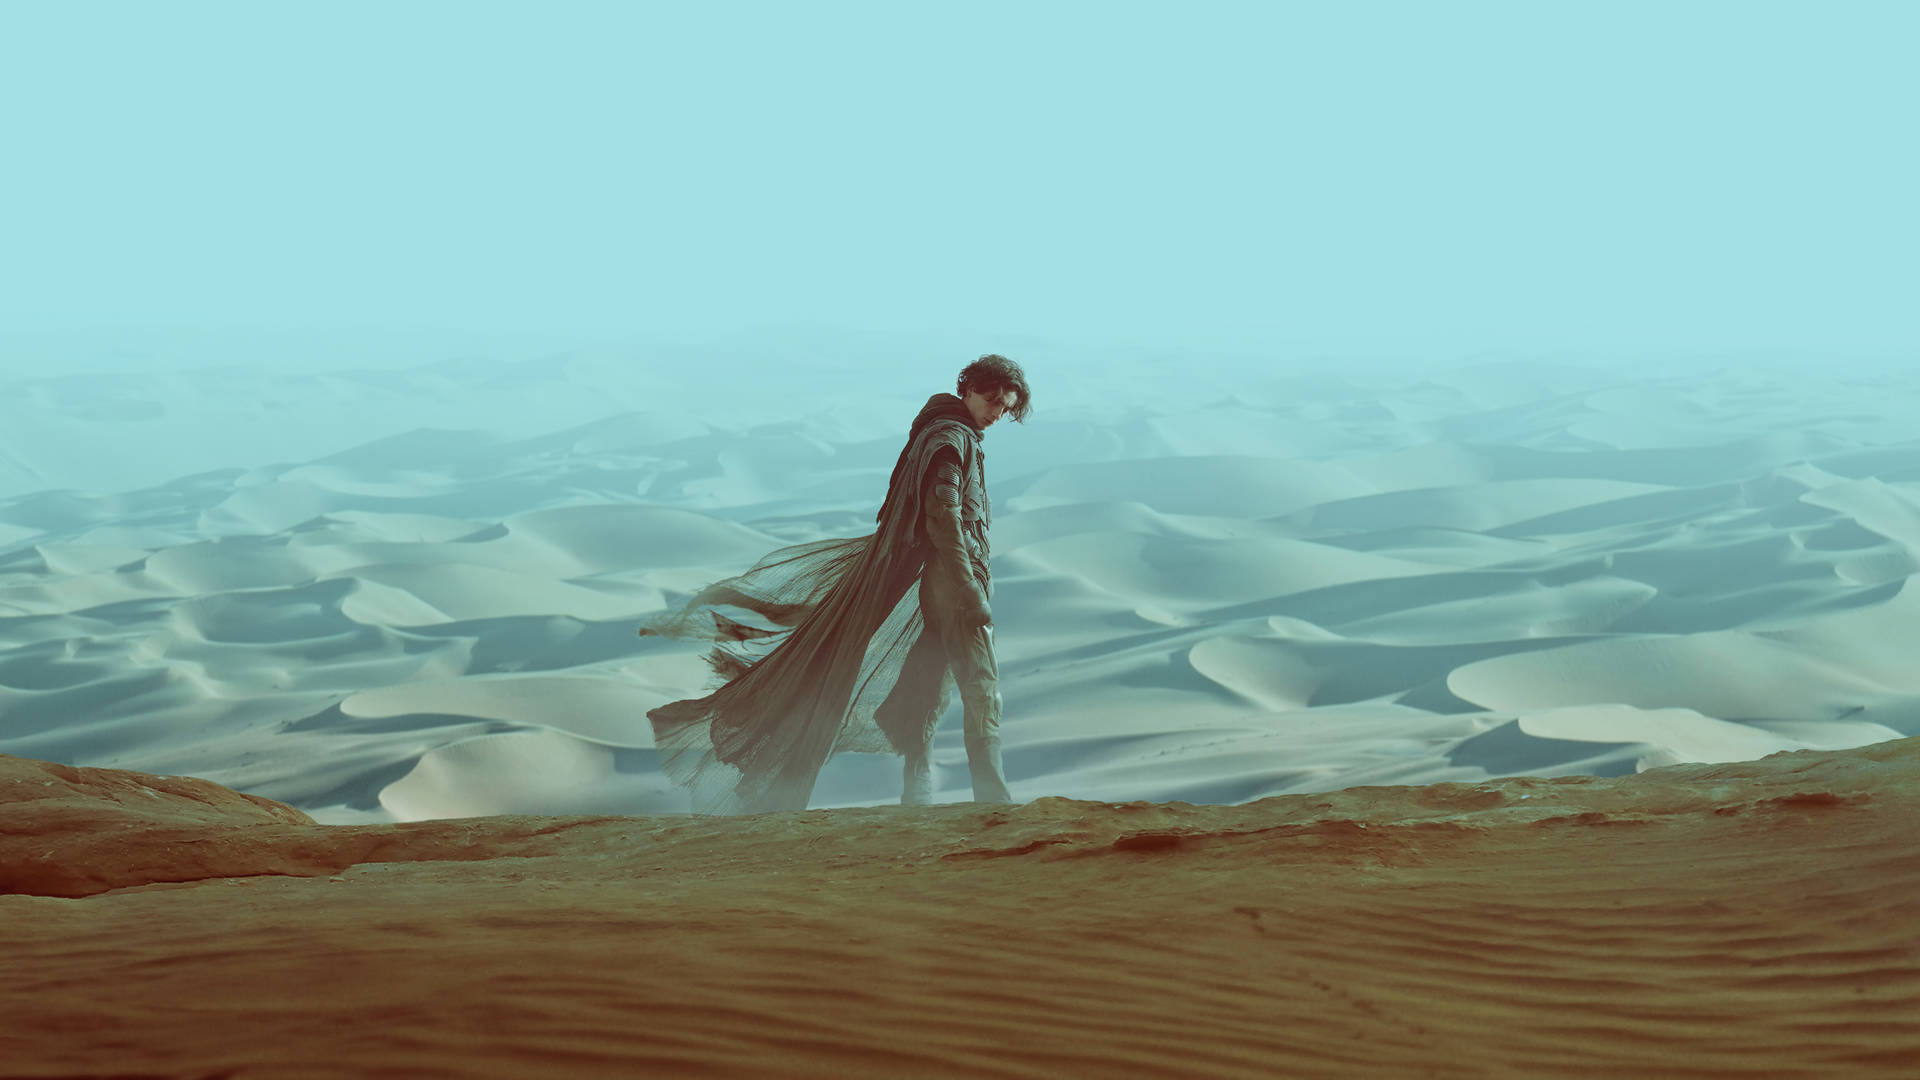 Timothée Chalamet Dune Outfit With Cape Background